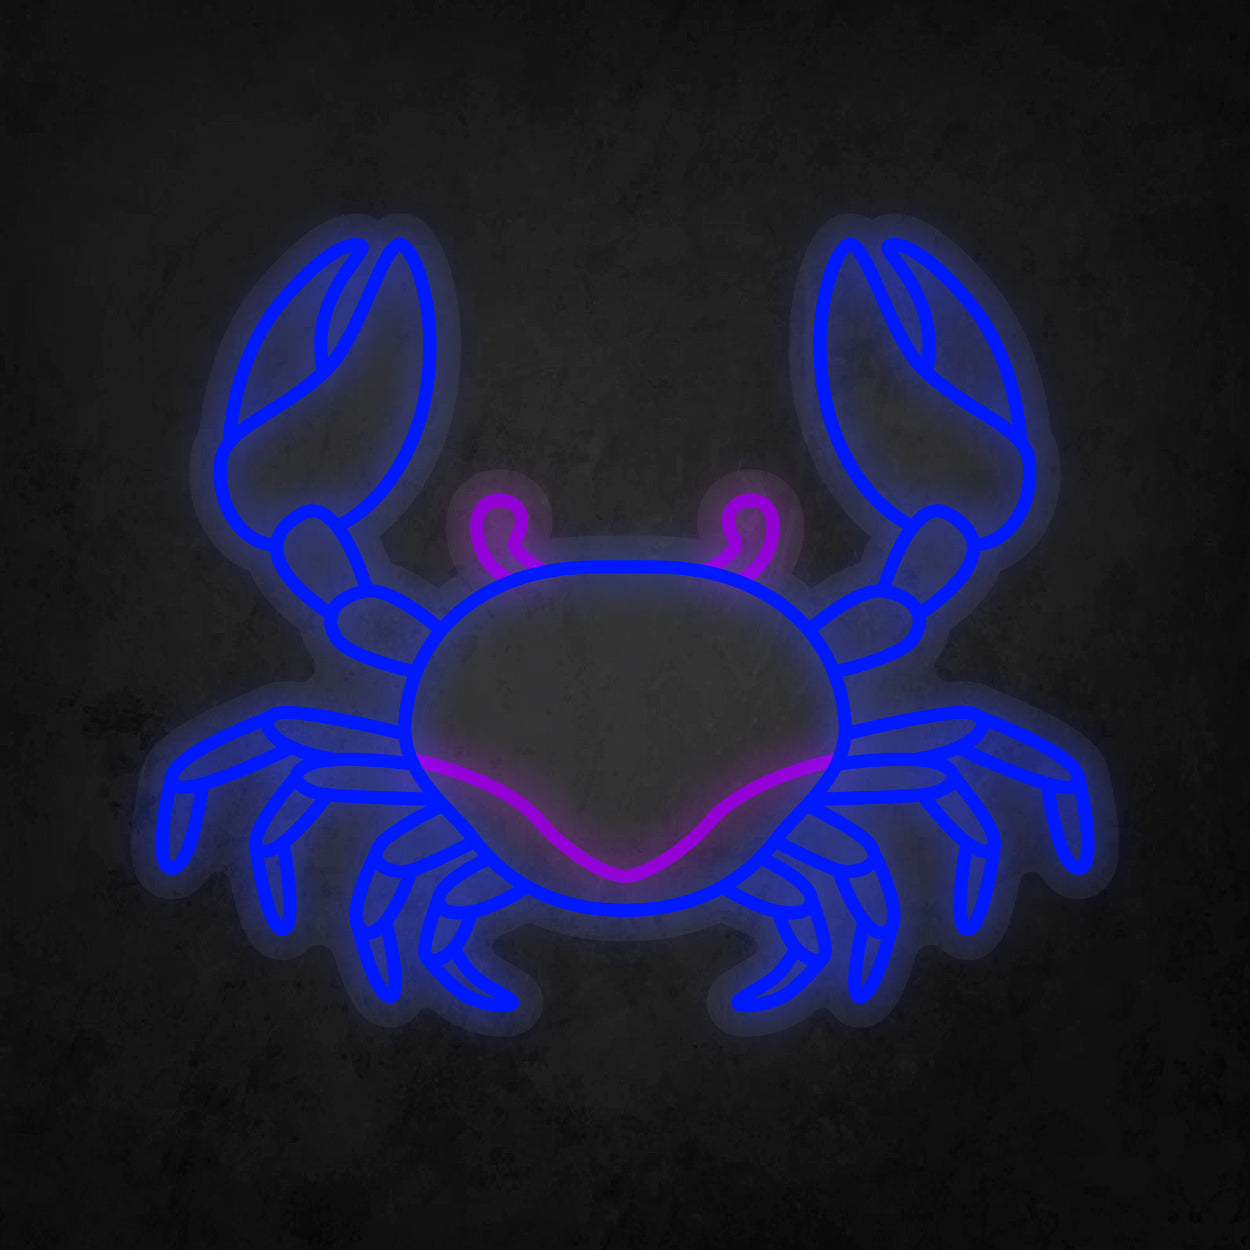 LED Neon Sign - Crab